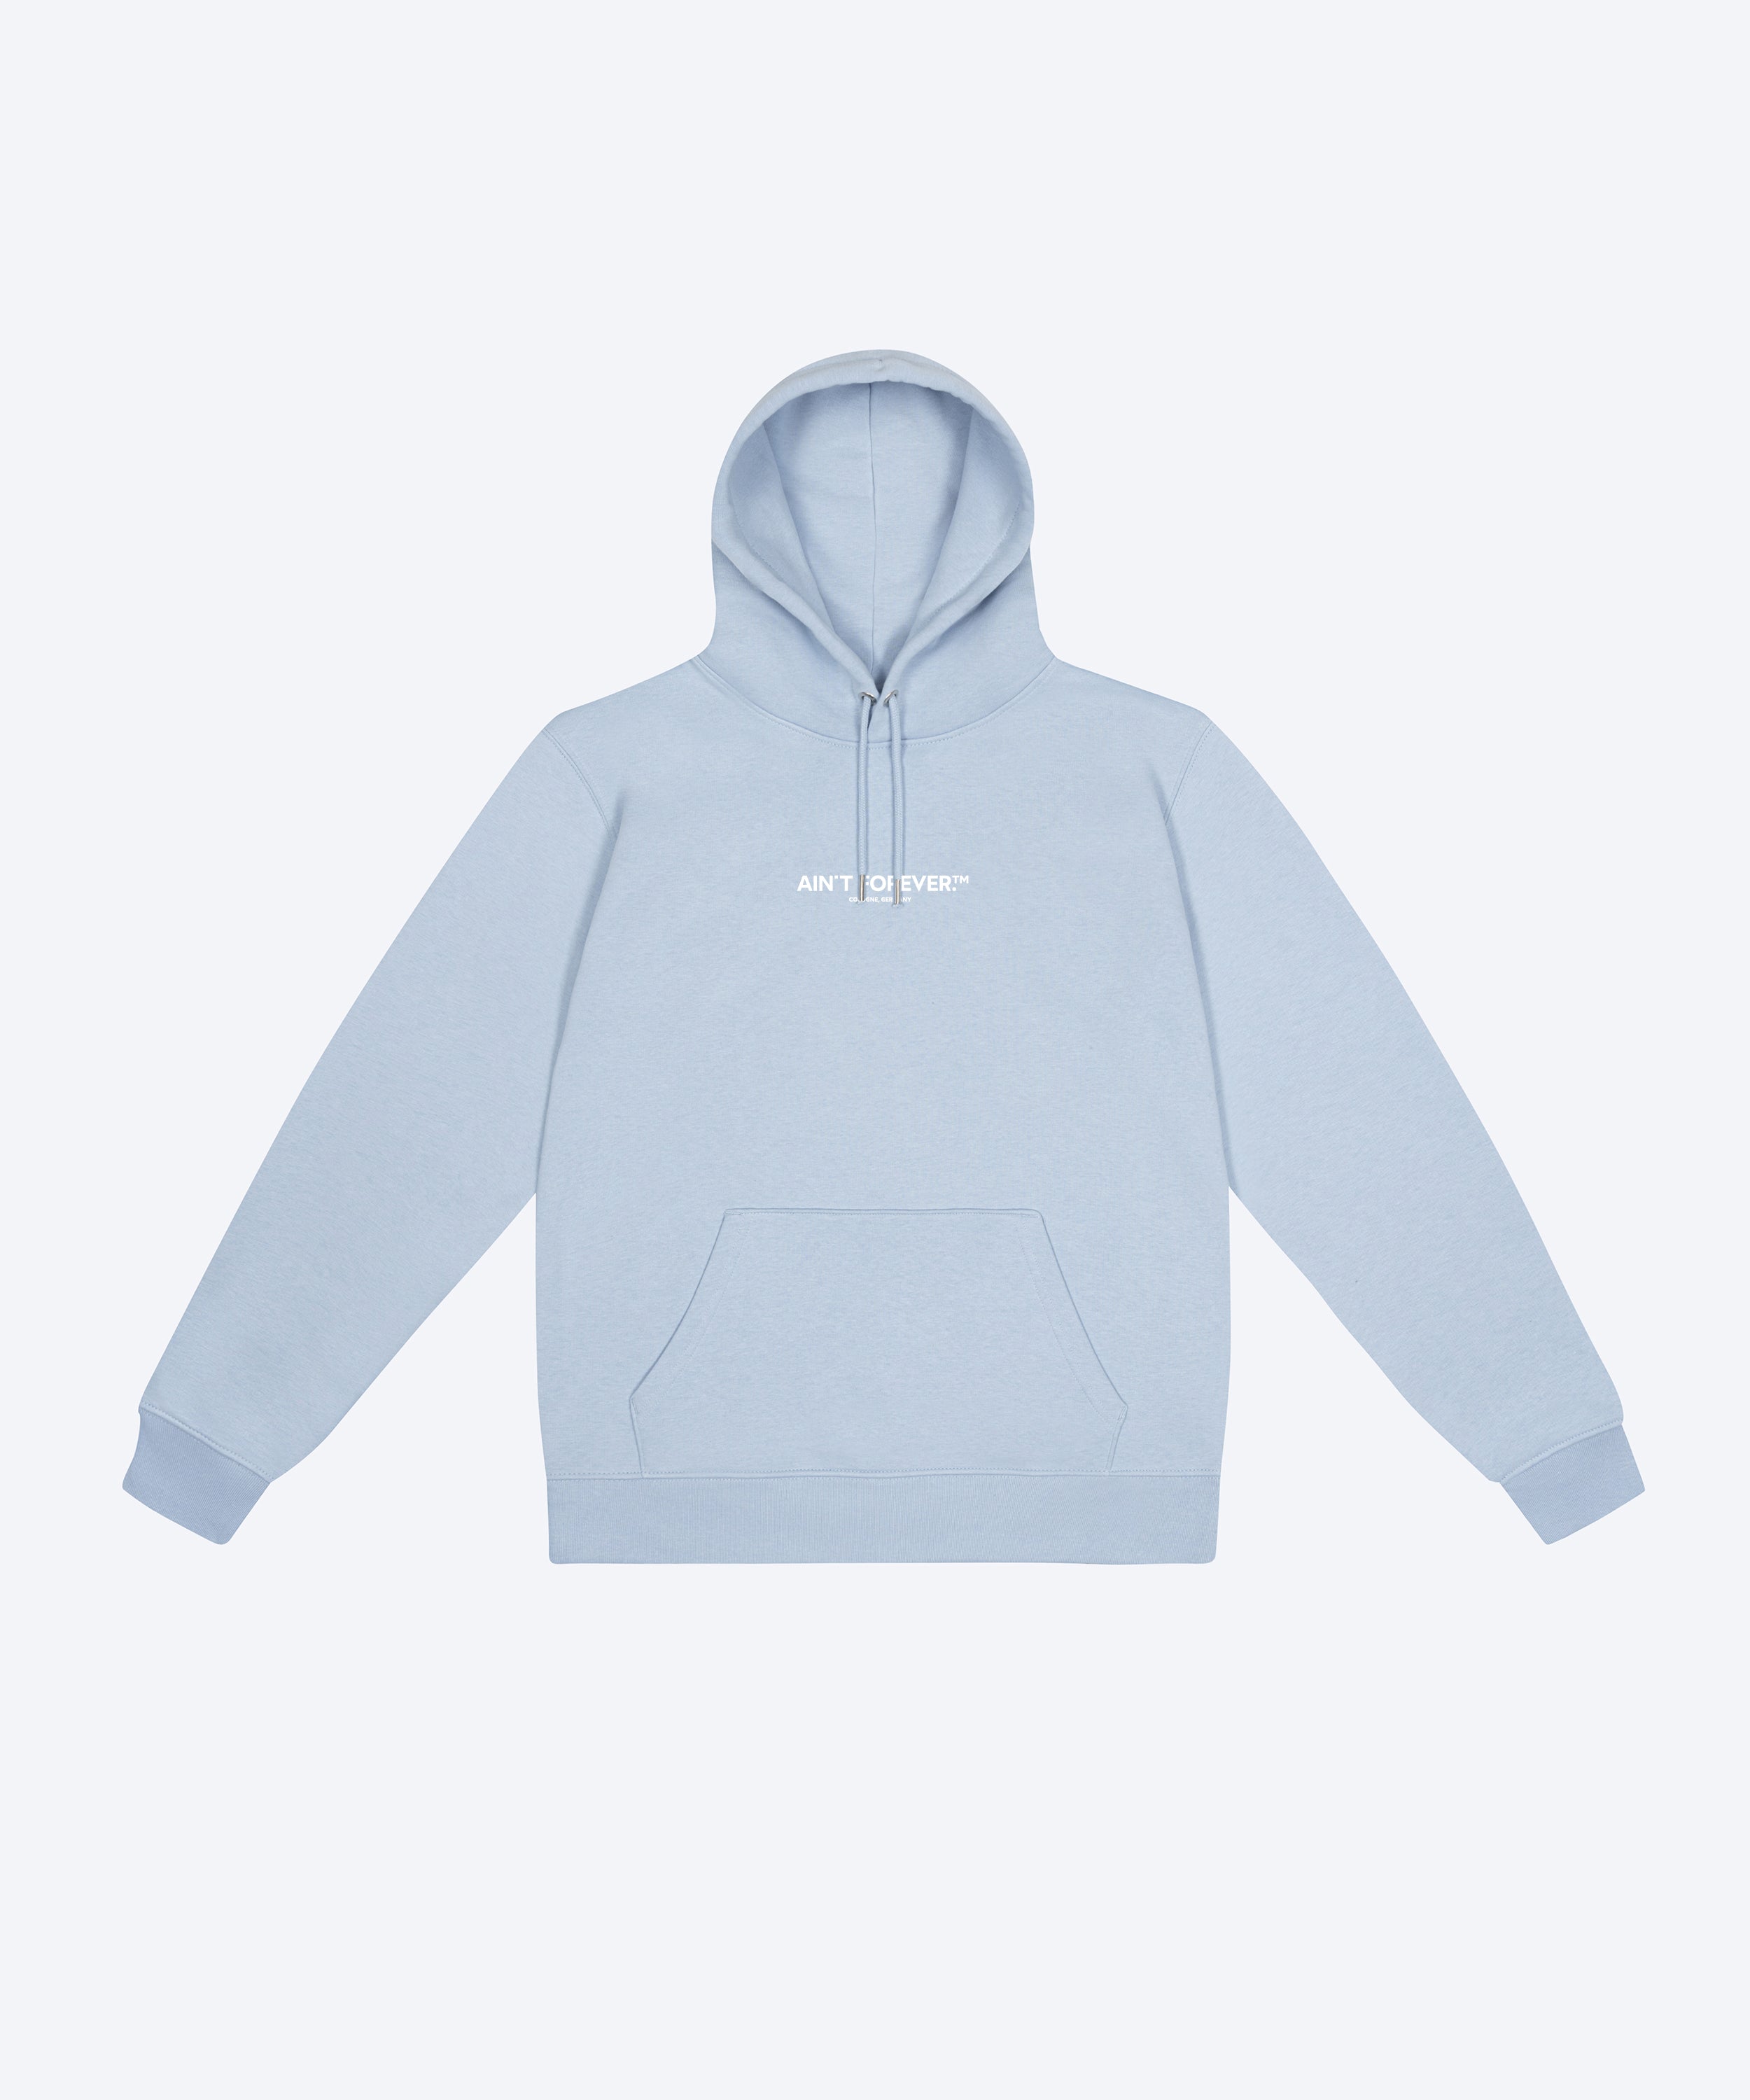 THE DEPARTURES HOODIE (SKY BLUE / WHITE)